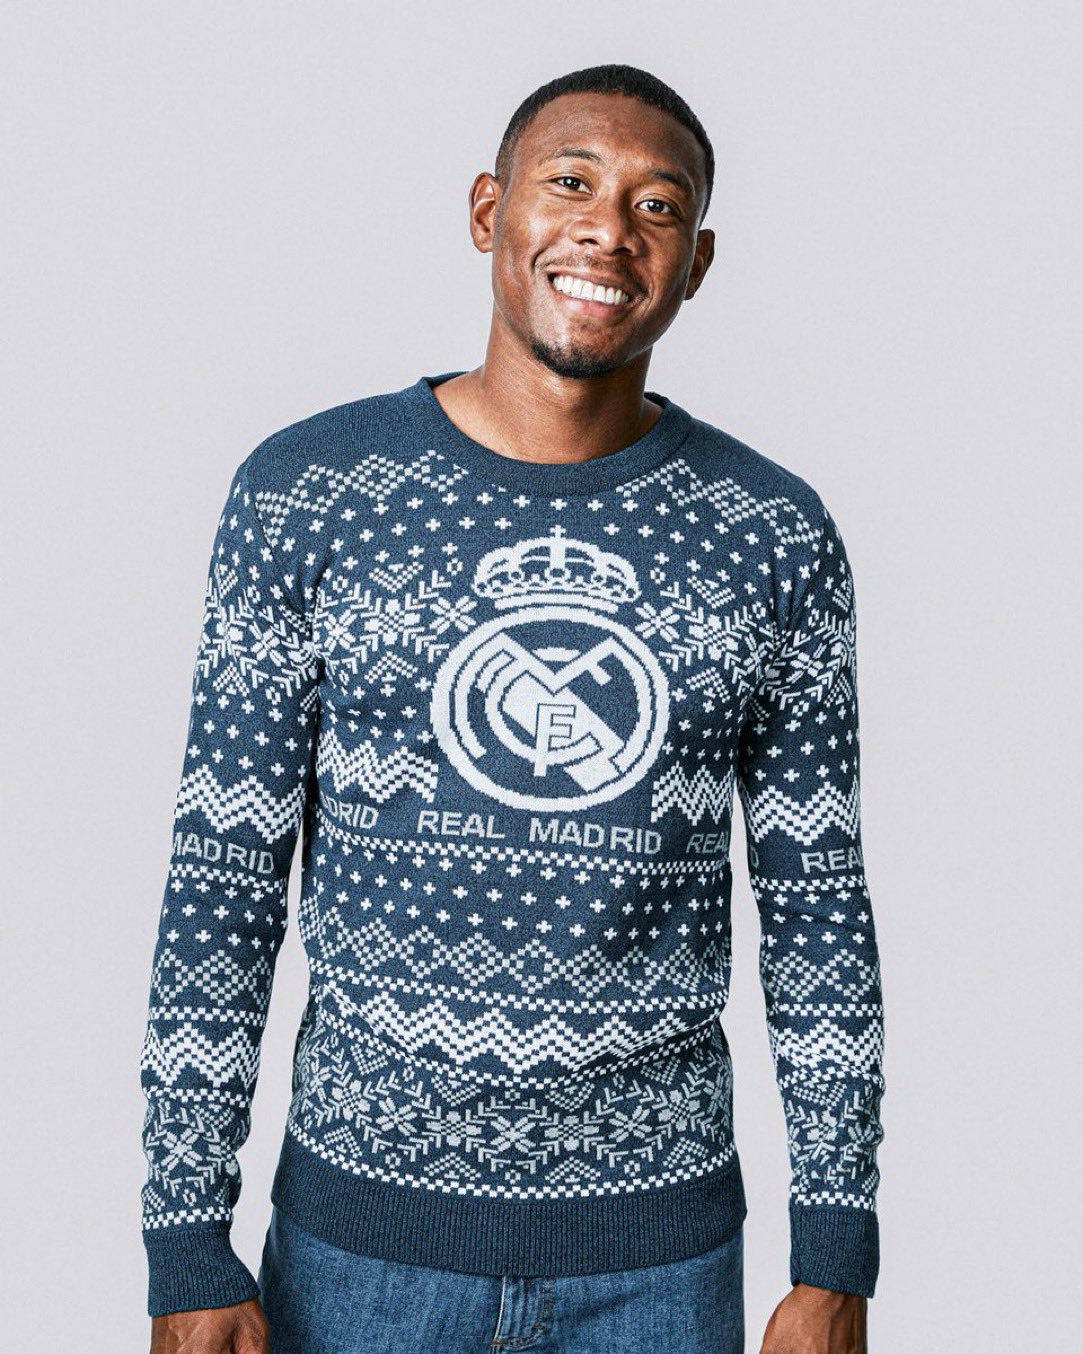 Madrid Zone on X: "Real Madrid's Christmas jumper. 🎄  https://t.co/pxcyc3L9ZG" / X